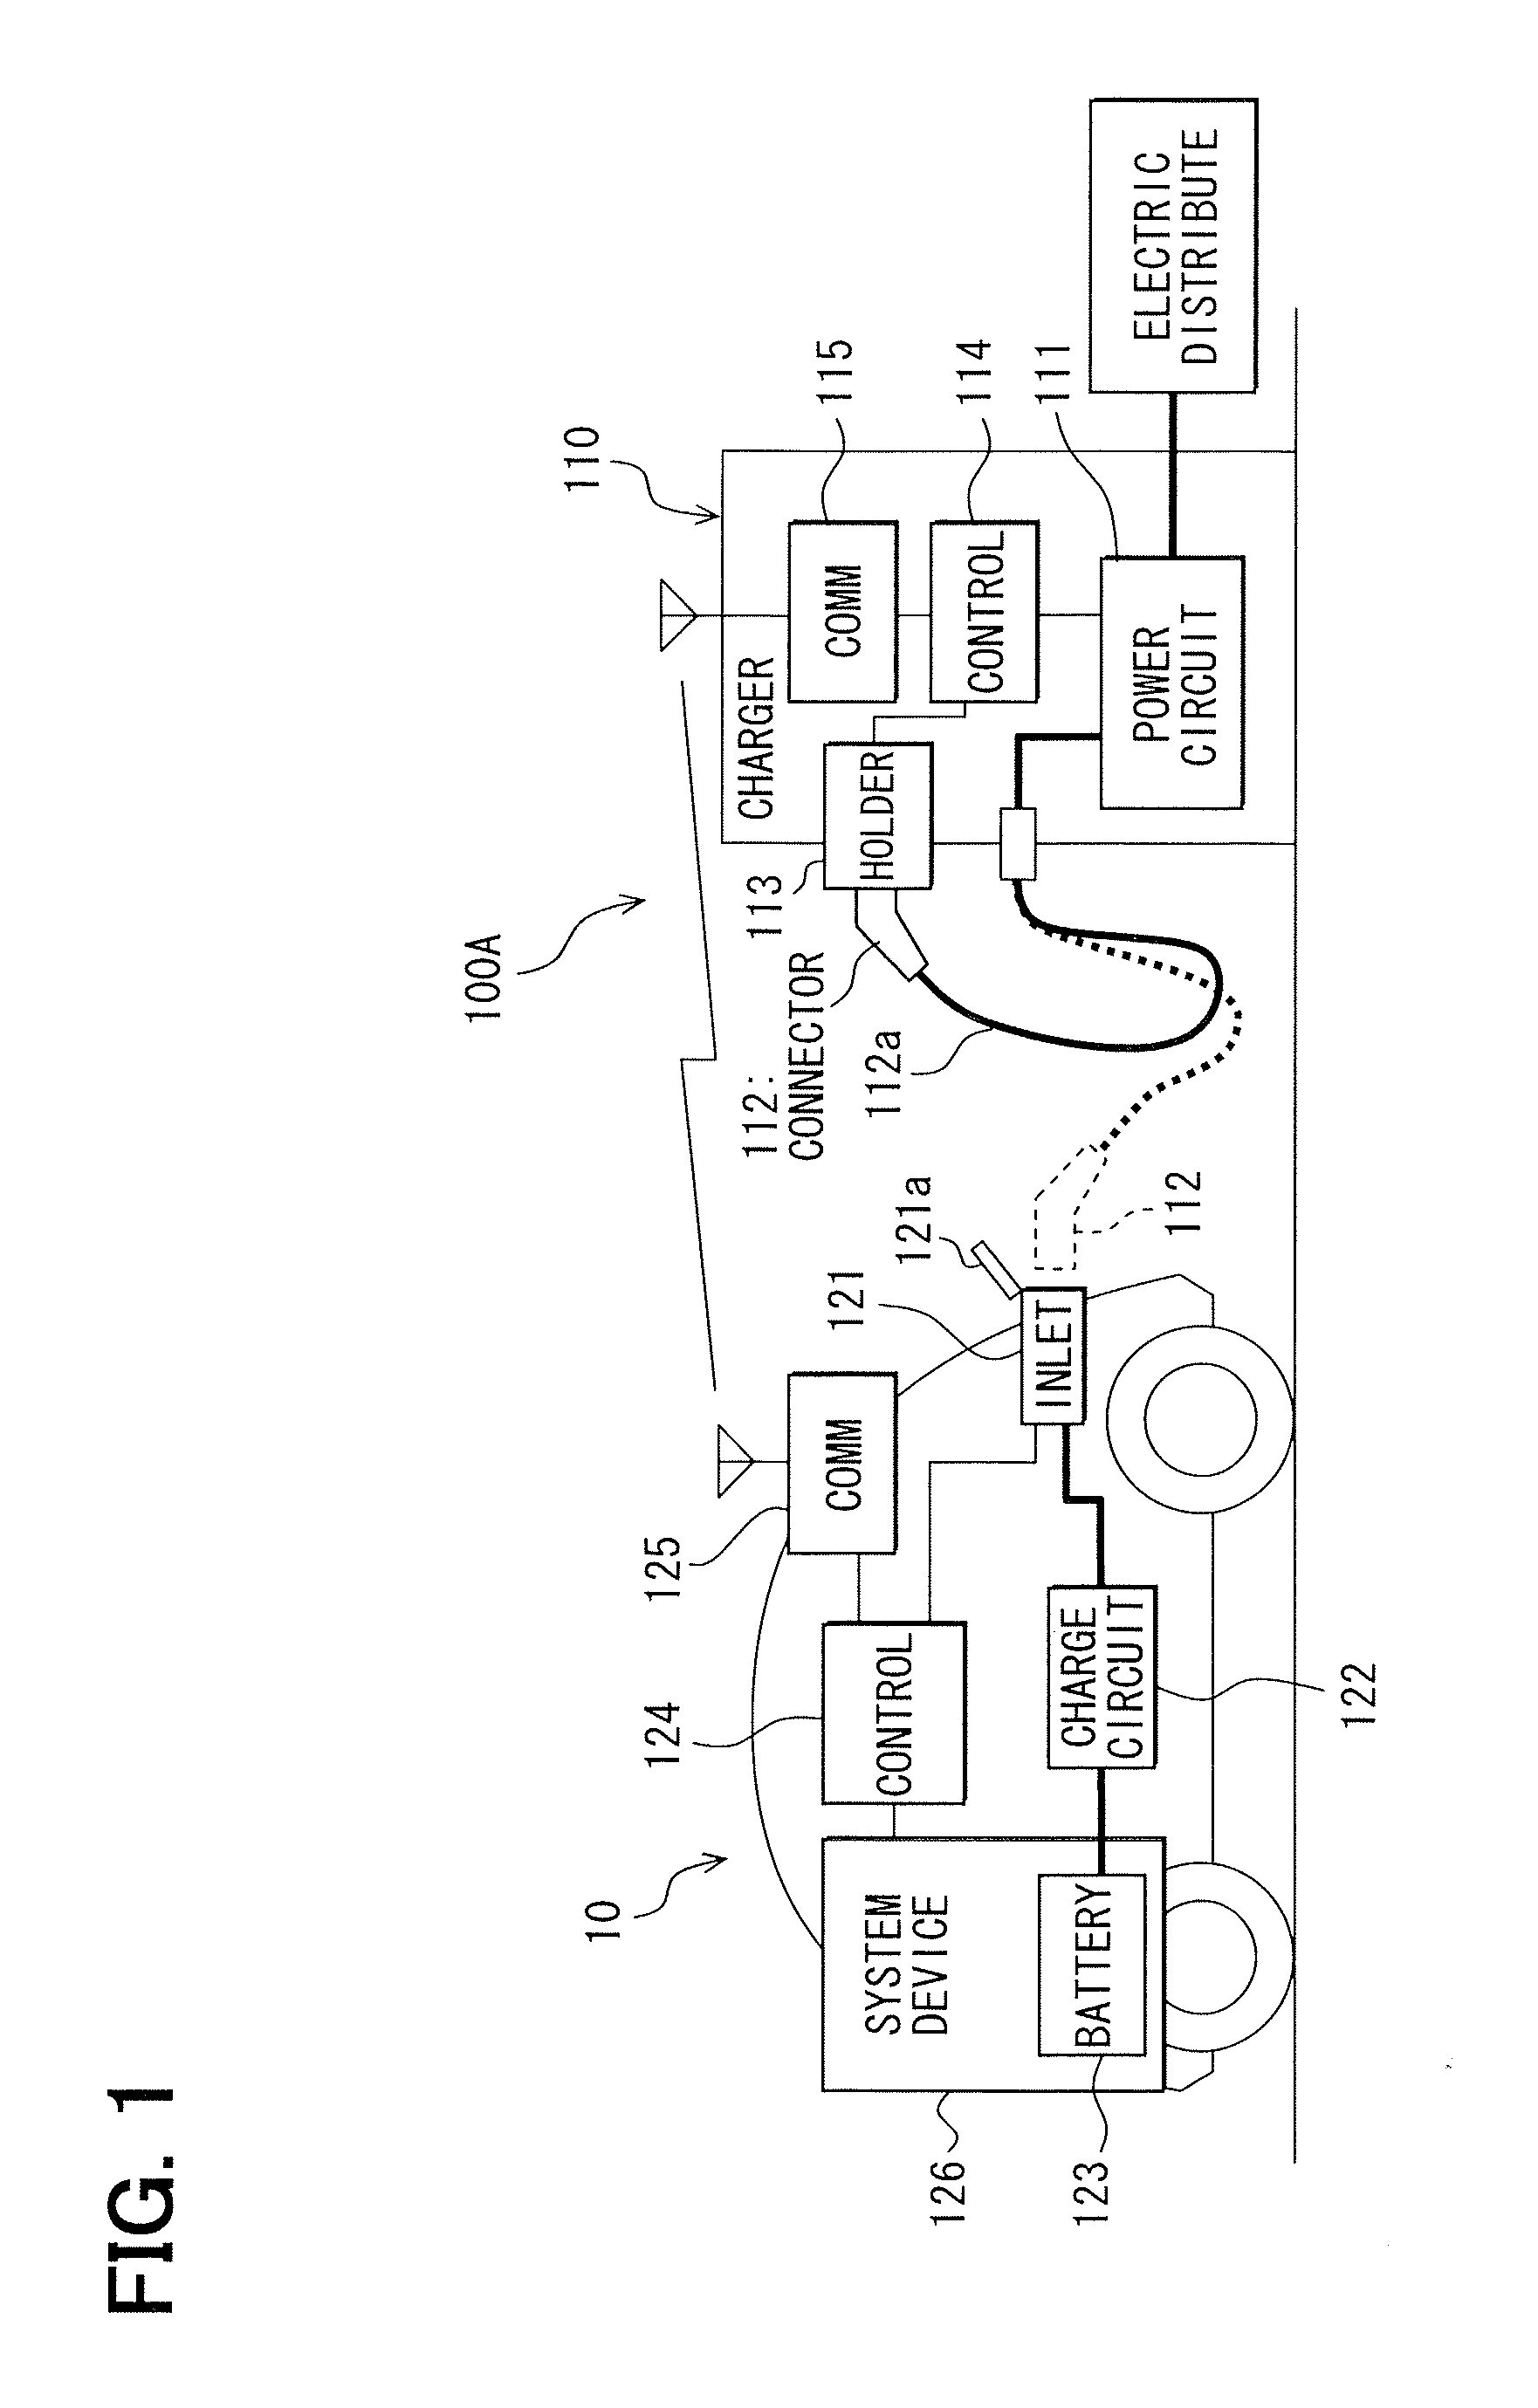 Vehicular charge apparatus